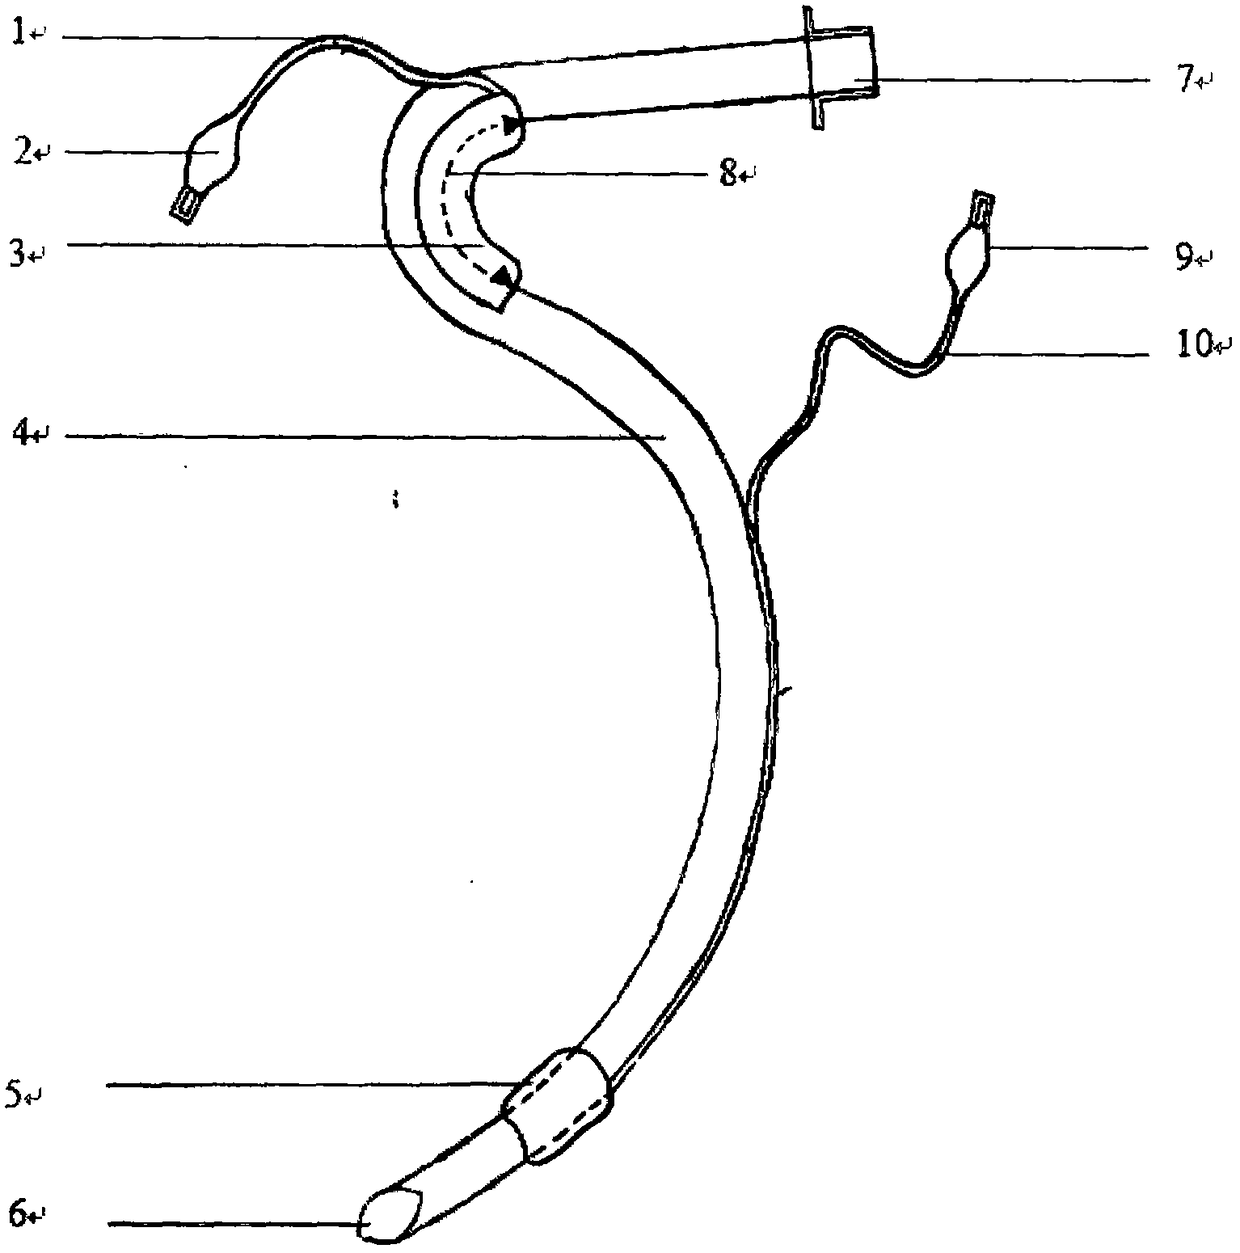 Nose-passing tracheal catheter with double cuffs